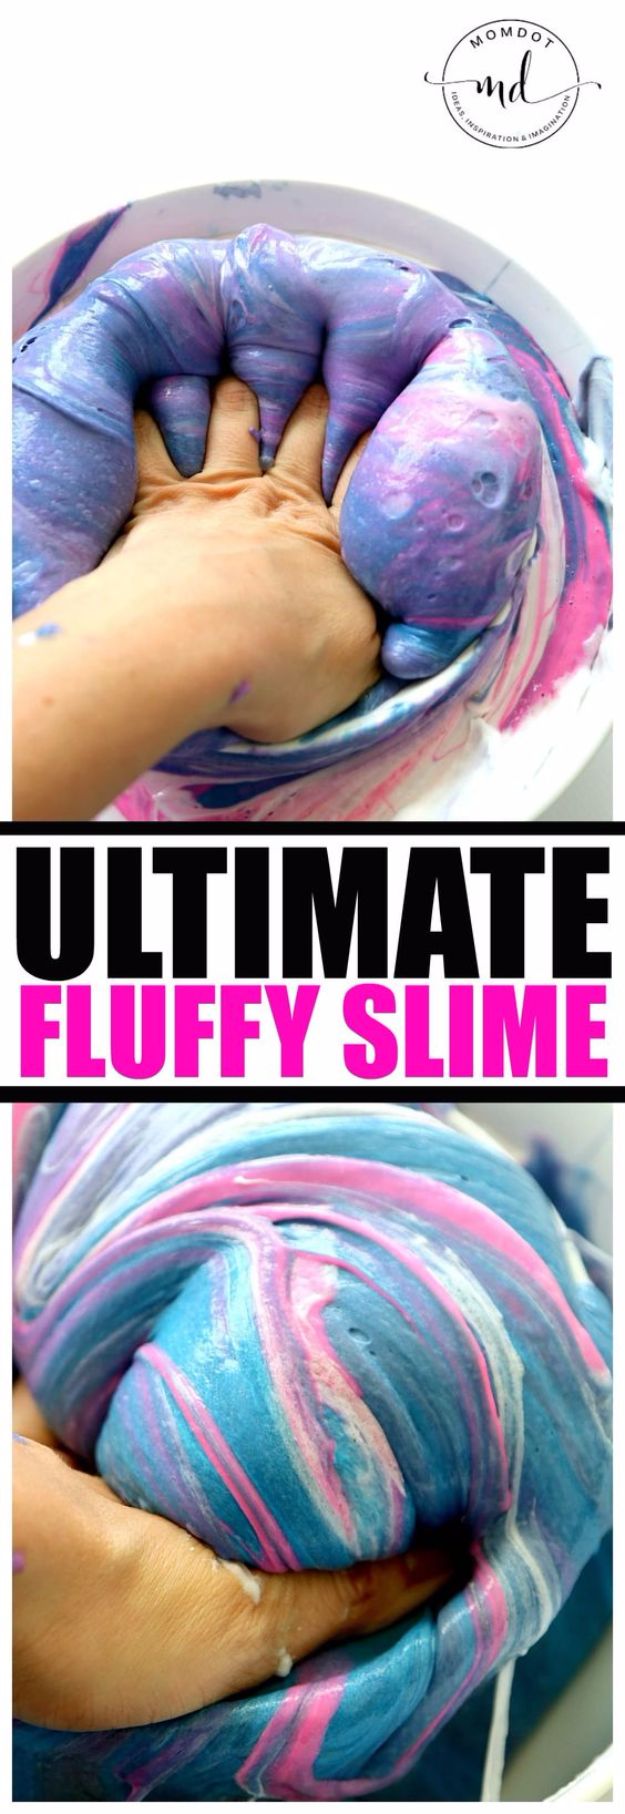 Cool Fluffy DIY Slime Recipes - Ultimate Fluffy Slime Recipe- Cool and Easy Slime Recipe and Tutorials - Ideas Without Glue, Without Borax, For Kids, With Liquid Starch, Cornstarch and Laundry Detergent - How to Make Slime at Home - Fun Crafts and DIY Projects for Teens, Kids, Teenagers and Teens - Galaxy and Glitter Slime, Edible Slime, Rainbow Colored Slime, Shaving Cream recipes and more fun crafts and slimes #slimerecipes #slime #diyslime #teencrafts